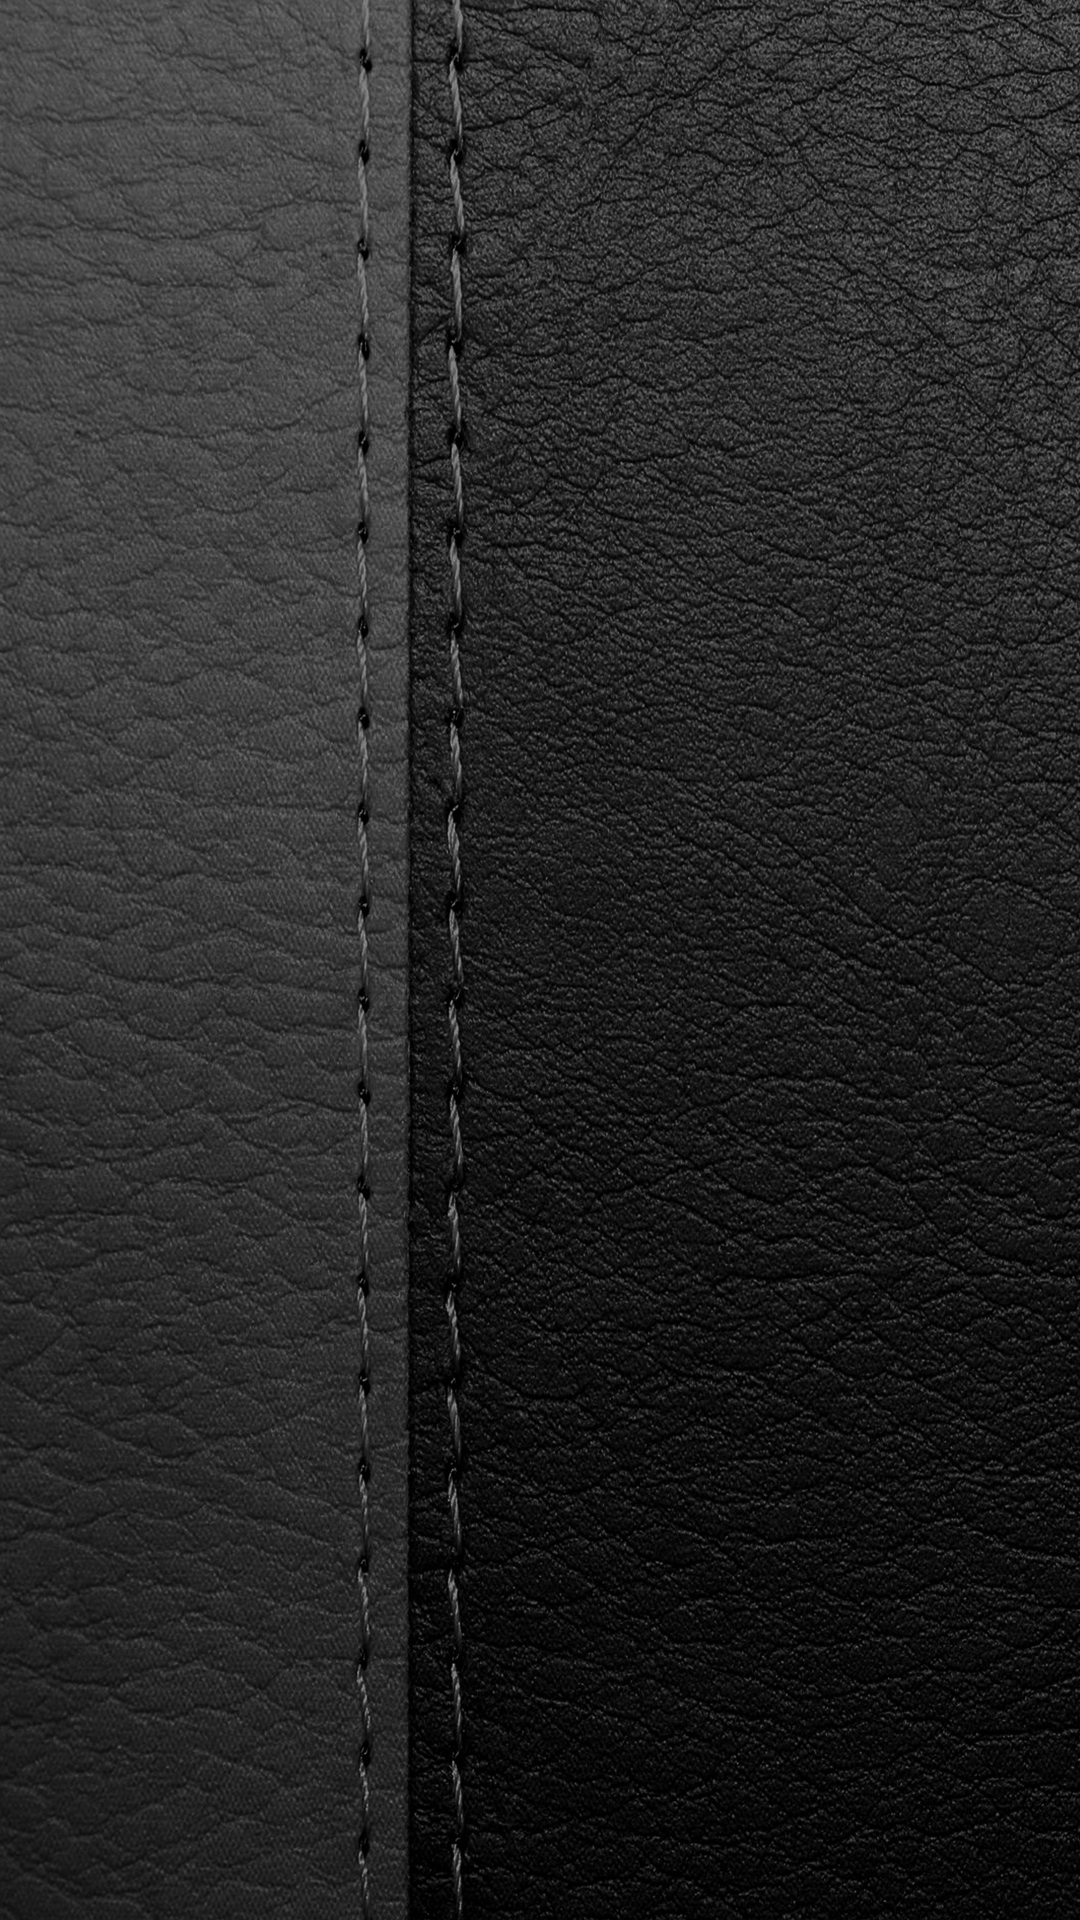 Black Leather iPhone 11 Pro Max Wallpaper